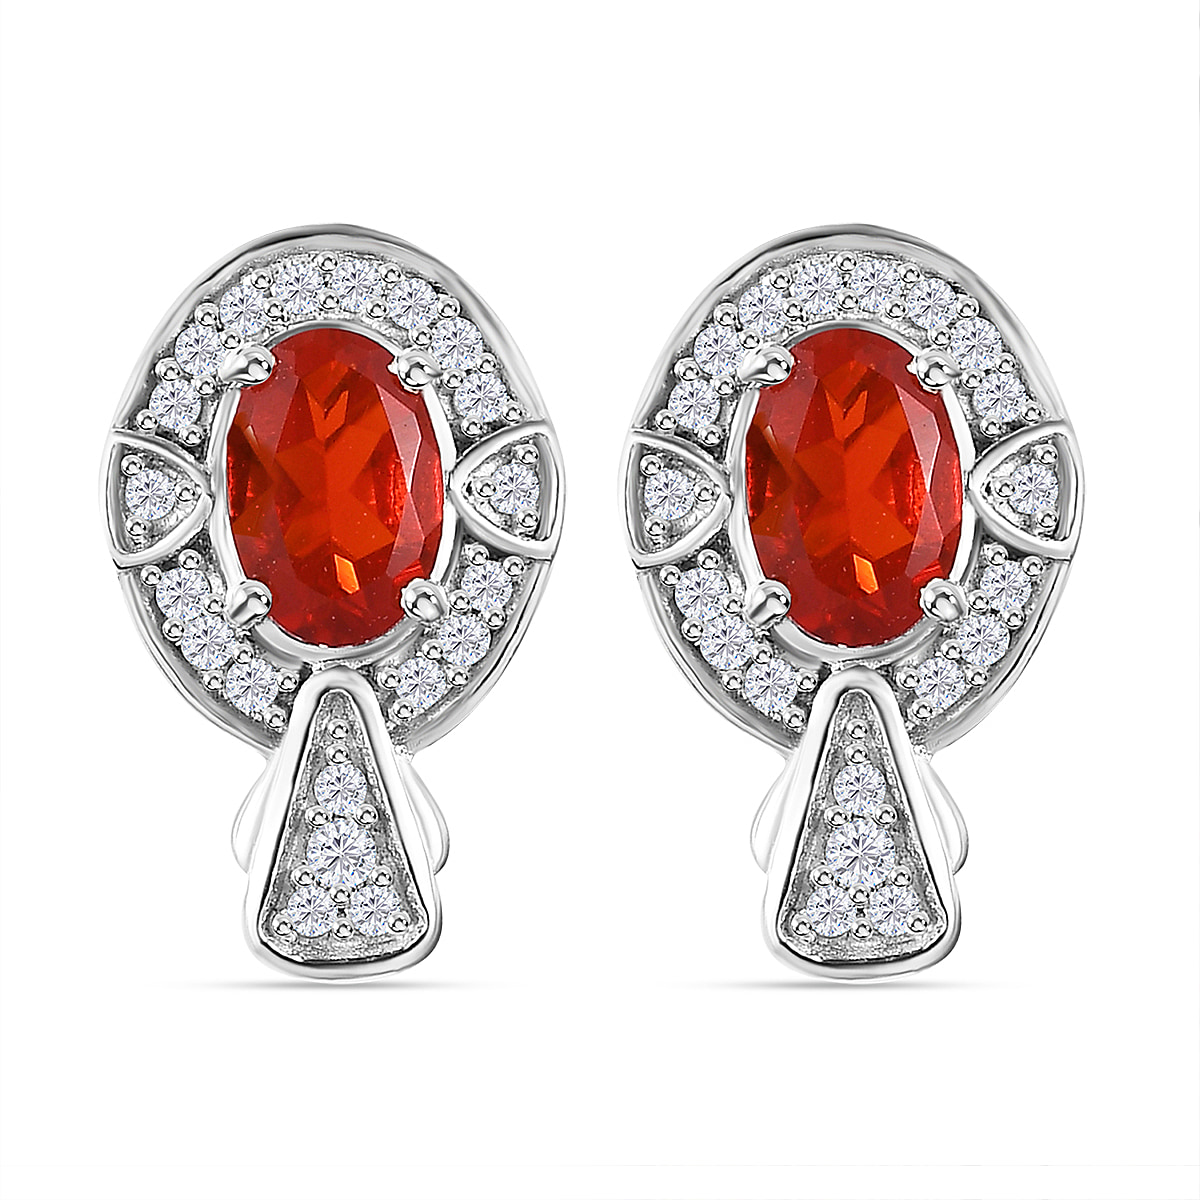 Salamanca Fire Opal & Natural Zircon Earrings in Platinum Overlay Sterling Silver 1.00 Ct.